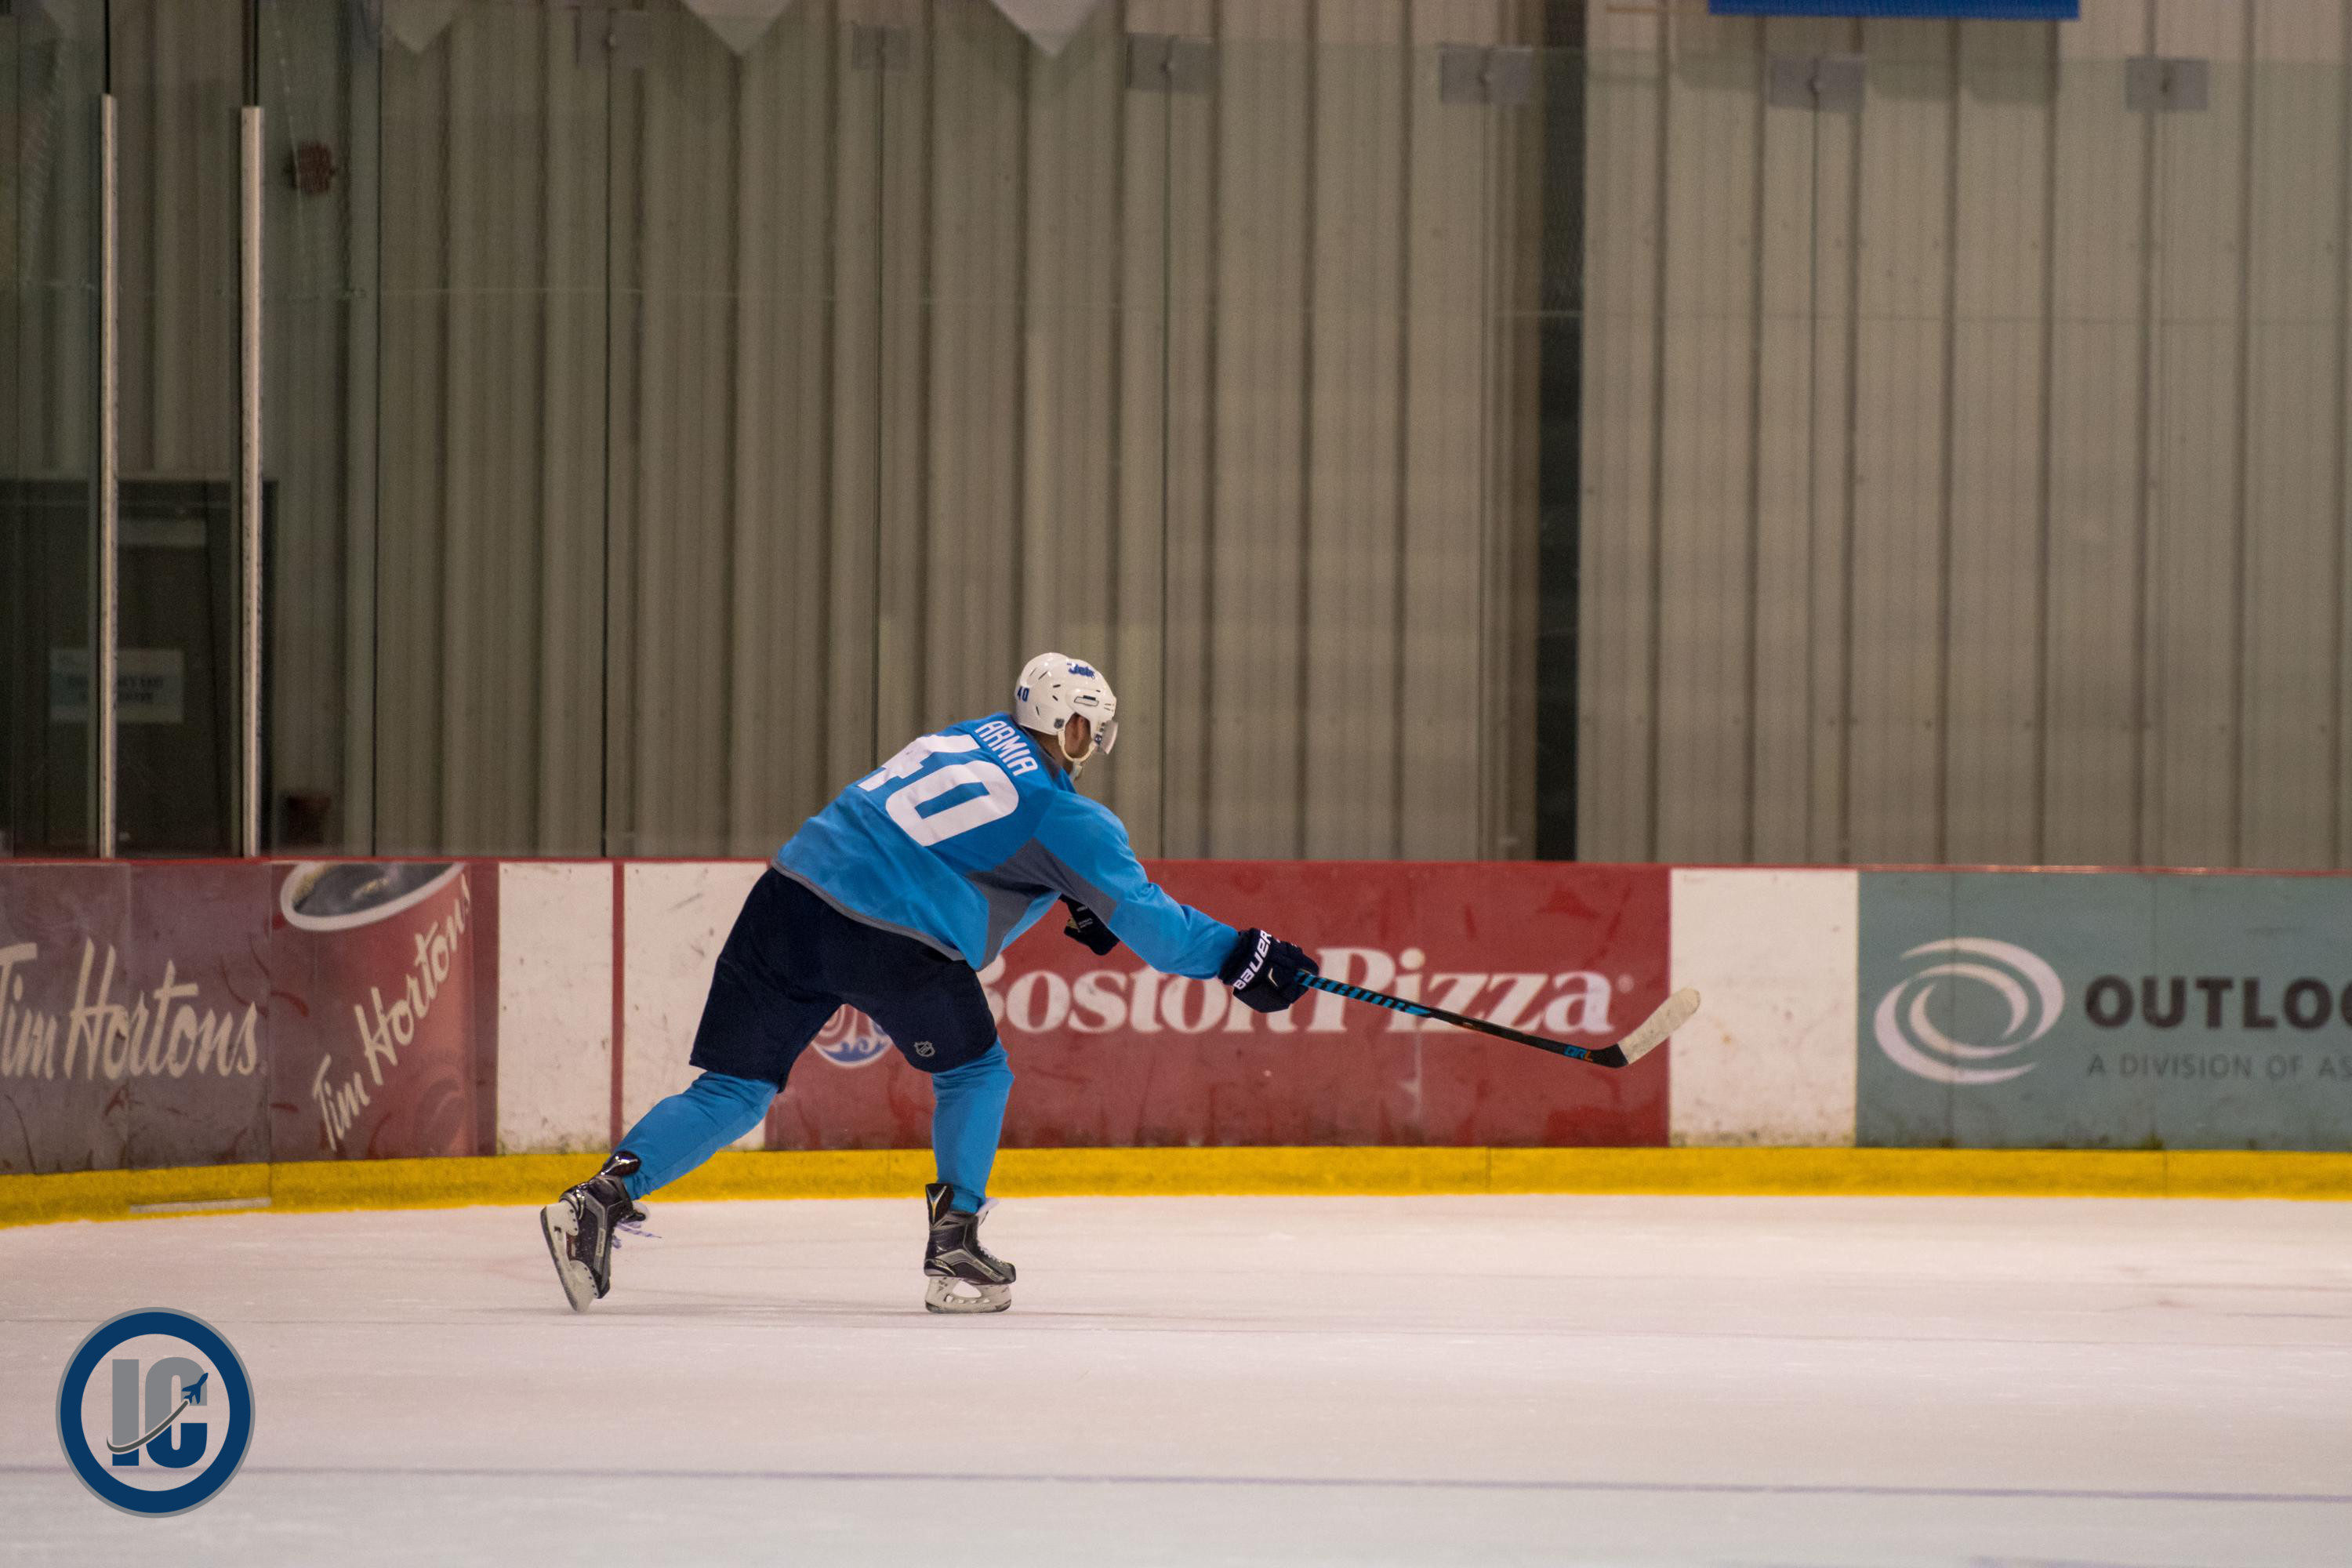 Armia practicing at